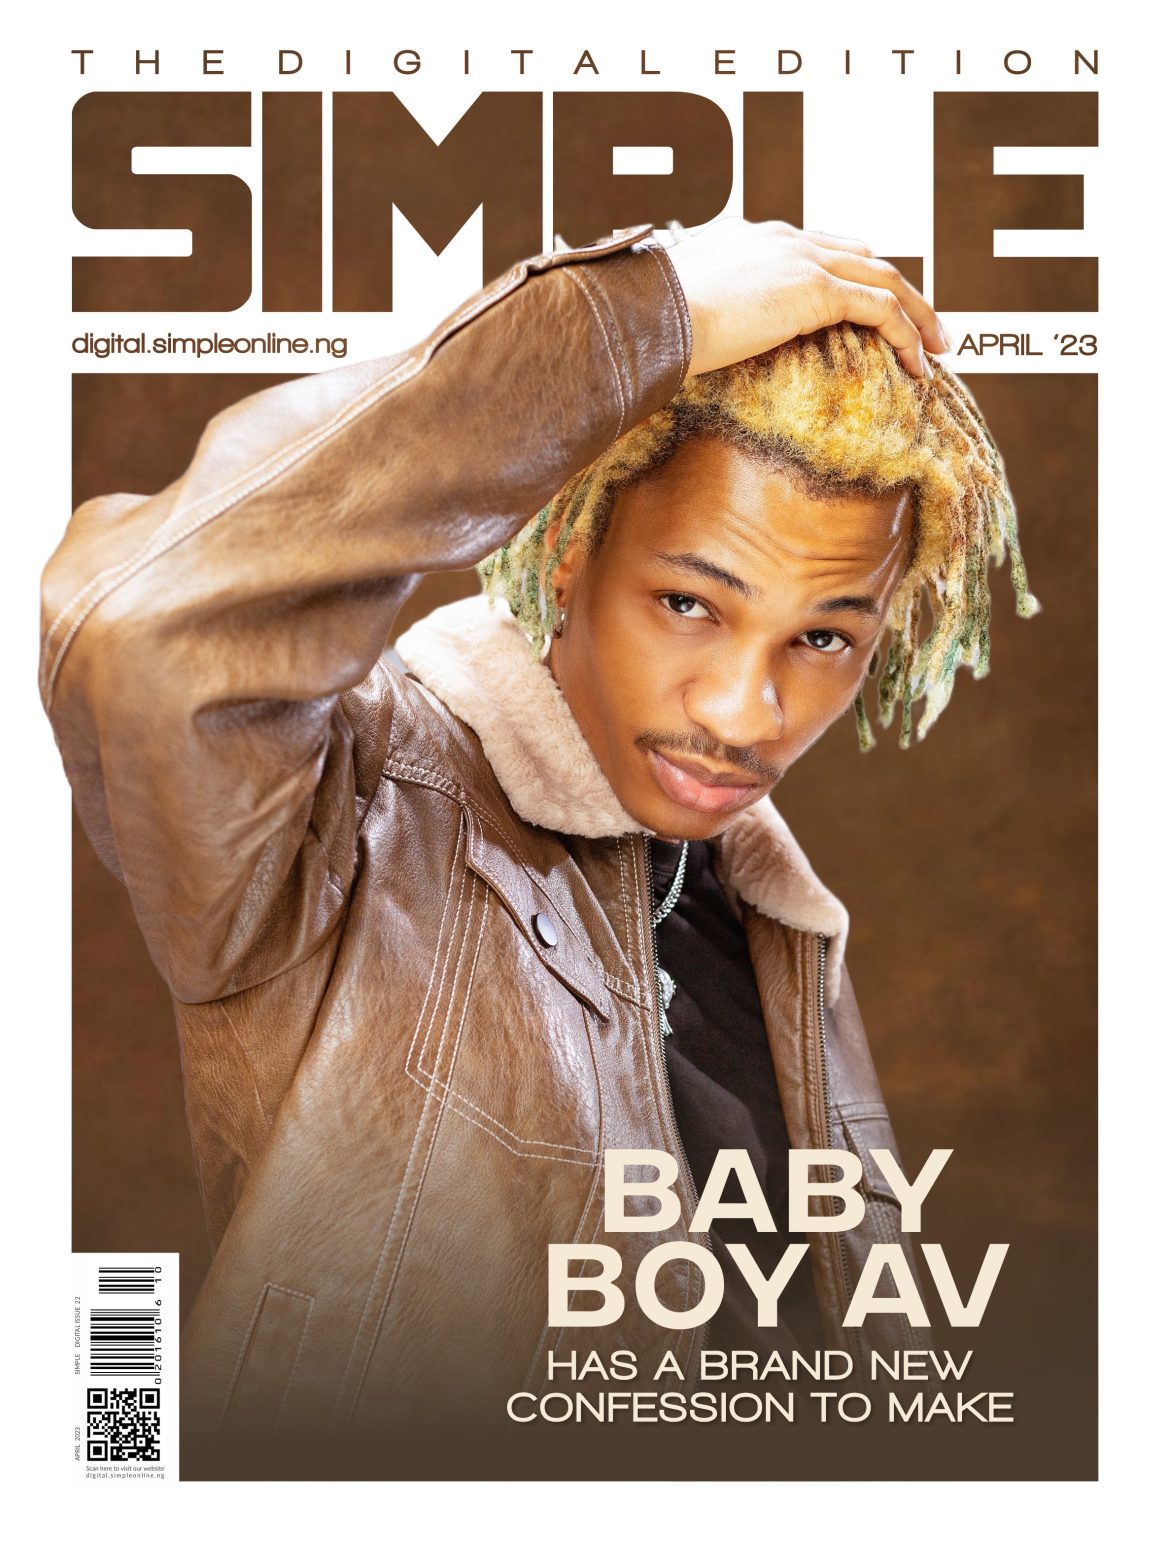 Baby Boy AV Has A New Confession In The April Digital Edition Of Simple Magazine